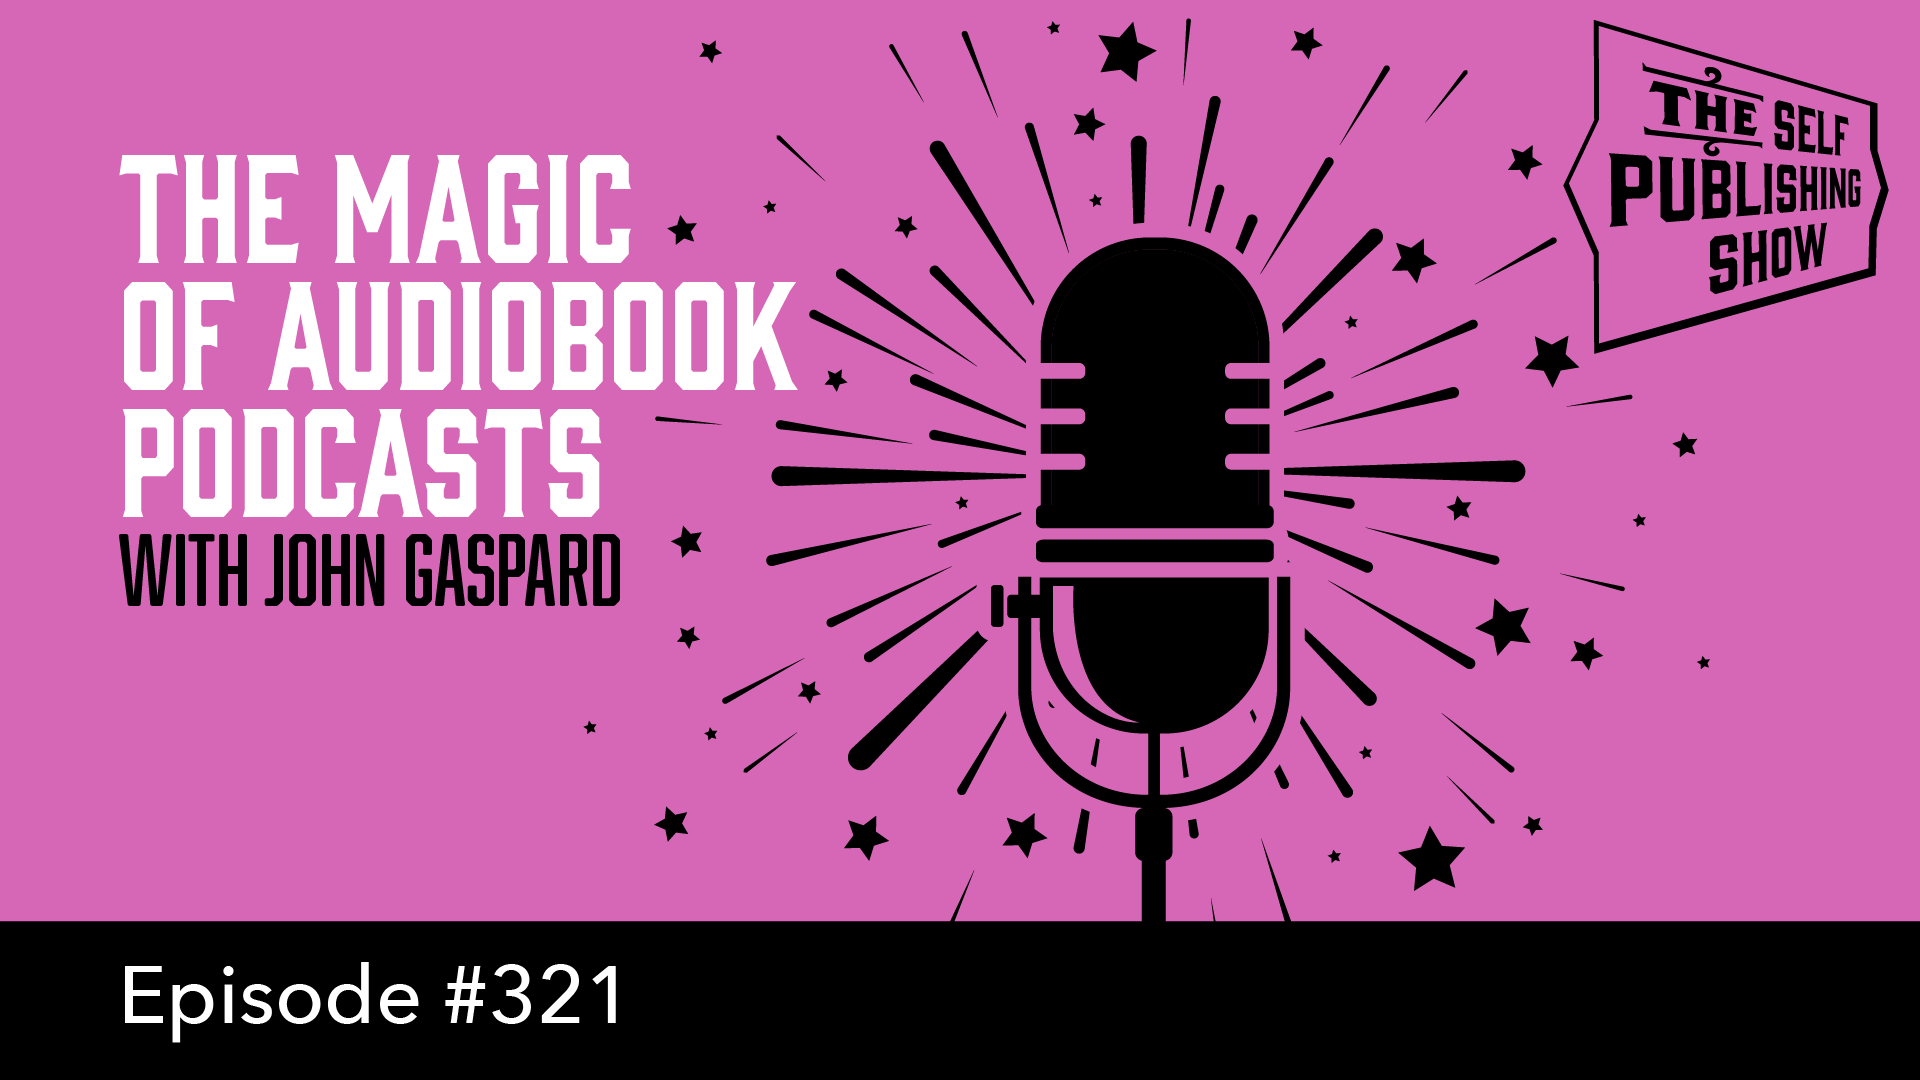 SPS-321: The Magic of Audiobook Podcasts – with John Gaspard